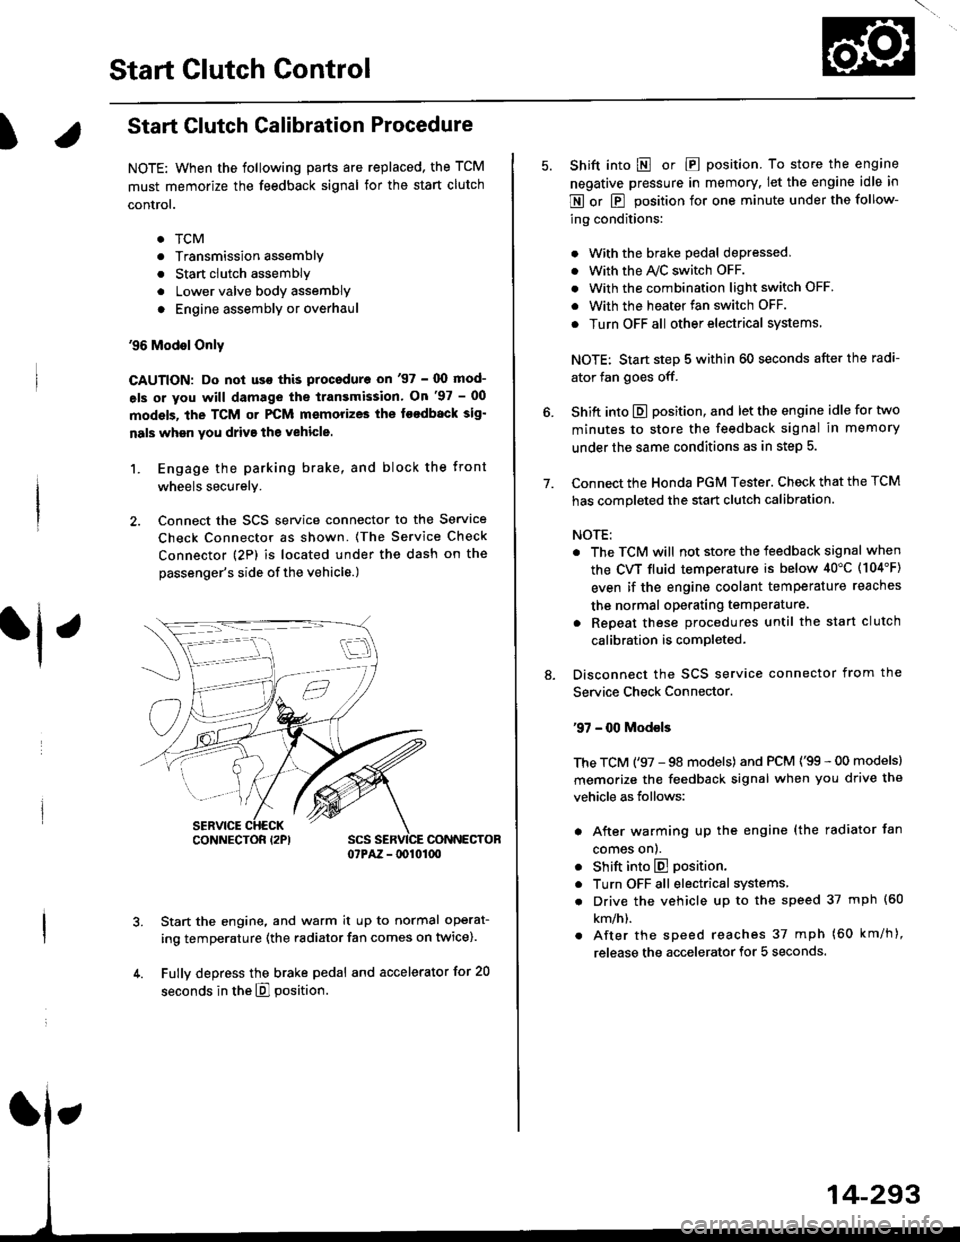 HONDA CIVIC 1996 6.G Service Manual Start Clutch Control@
T
Start Clutch Calibration Procedure
NOTE: When the following parts are replaced, the TCM
must memorize the feedback signal for the start clutch
control.
. TCM
. Transmissionasse